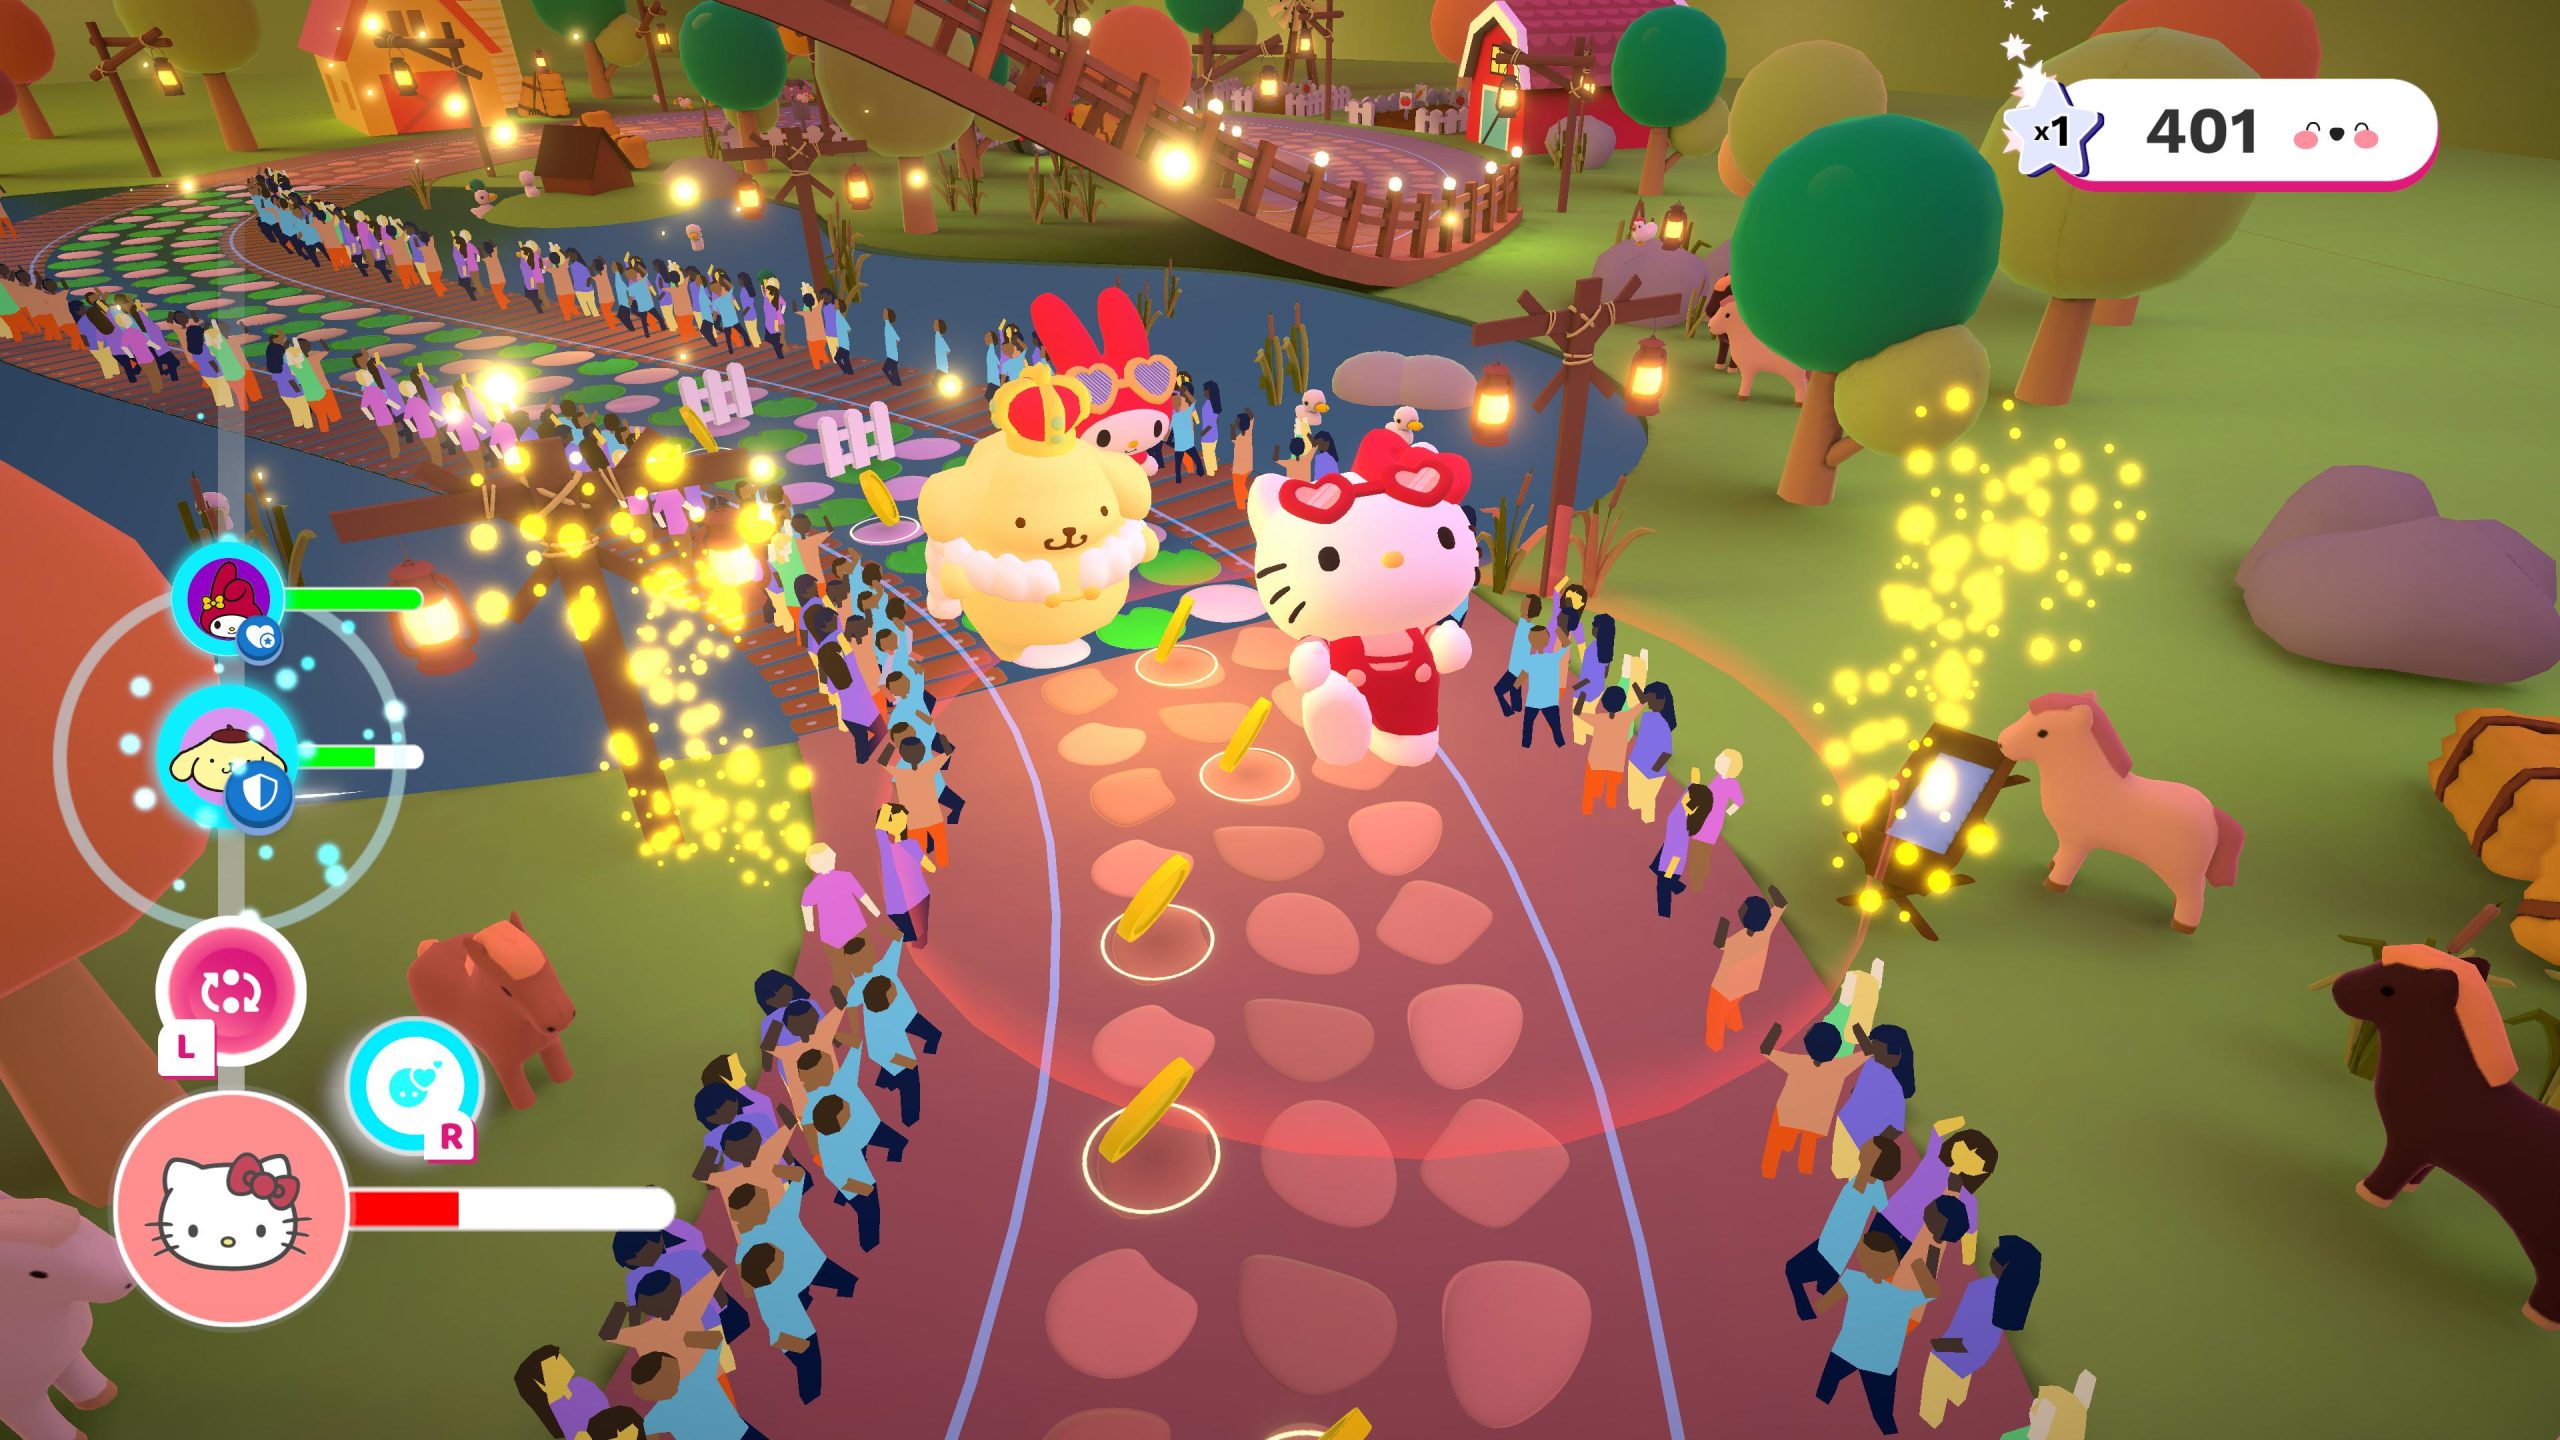 A screenshot from Hello Kitty Happiness Parade